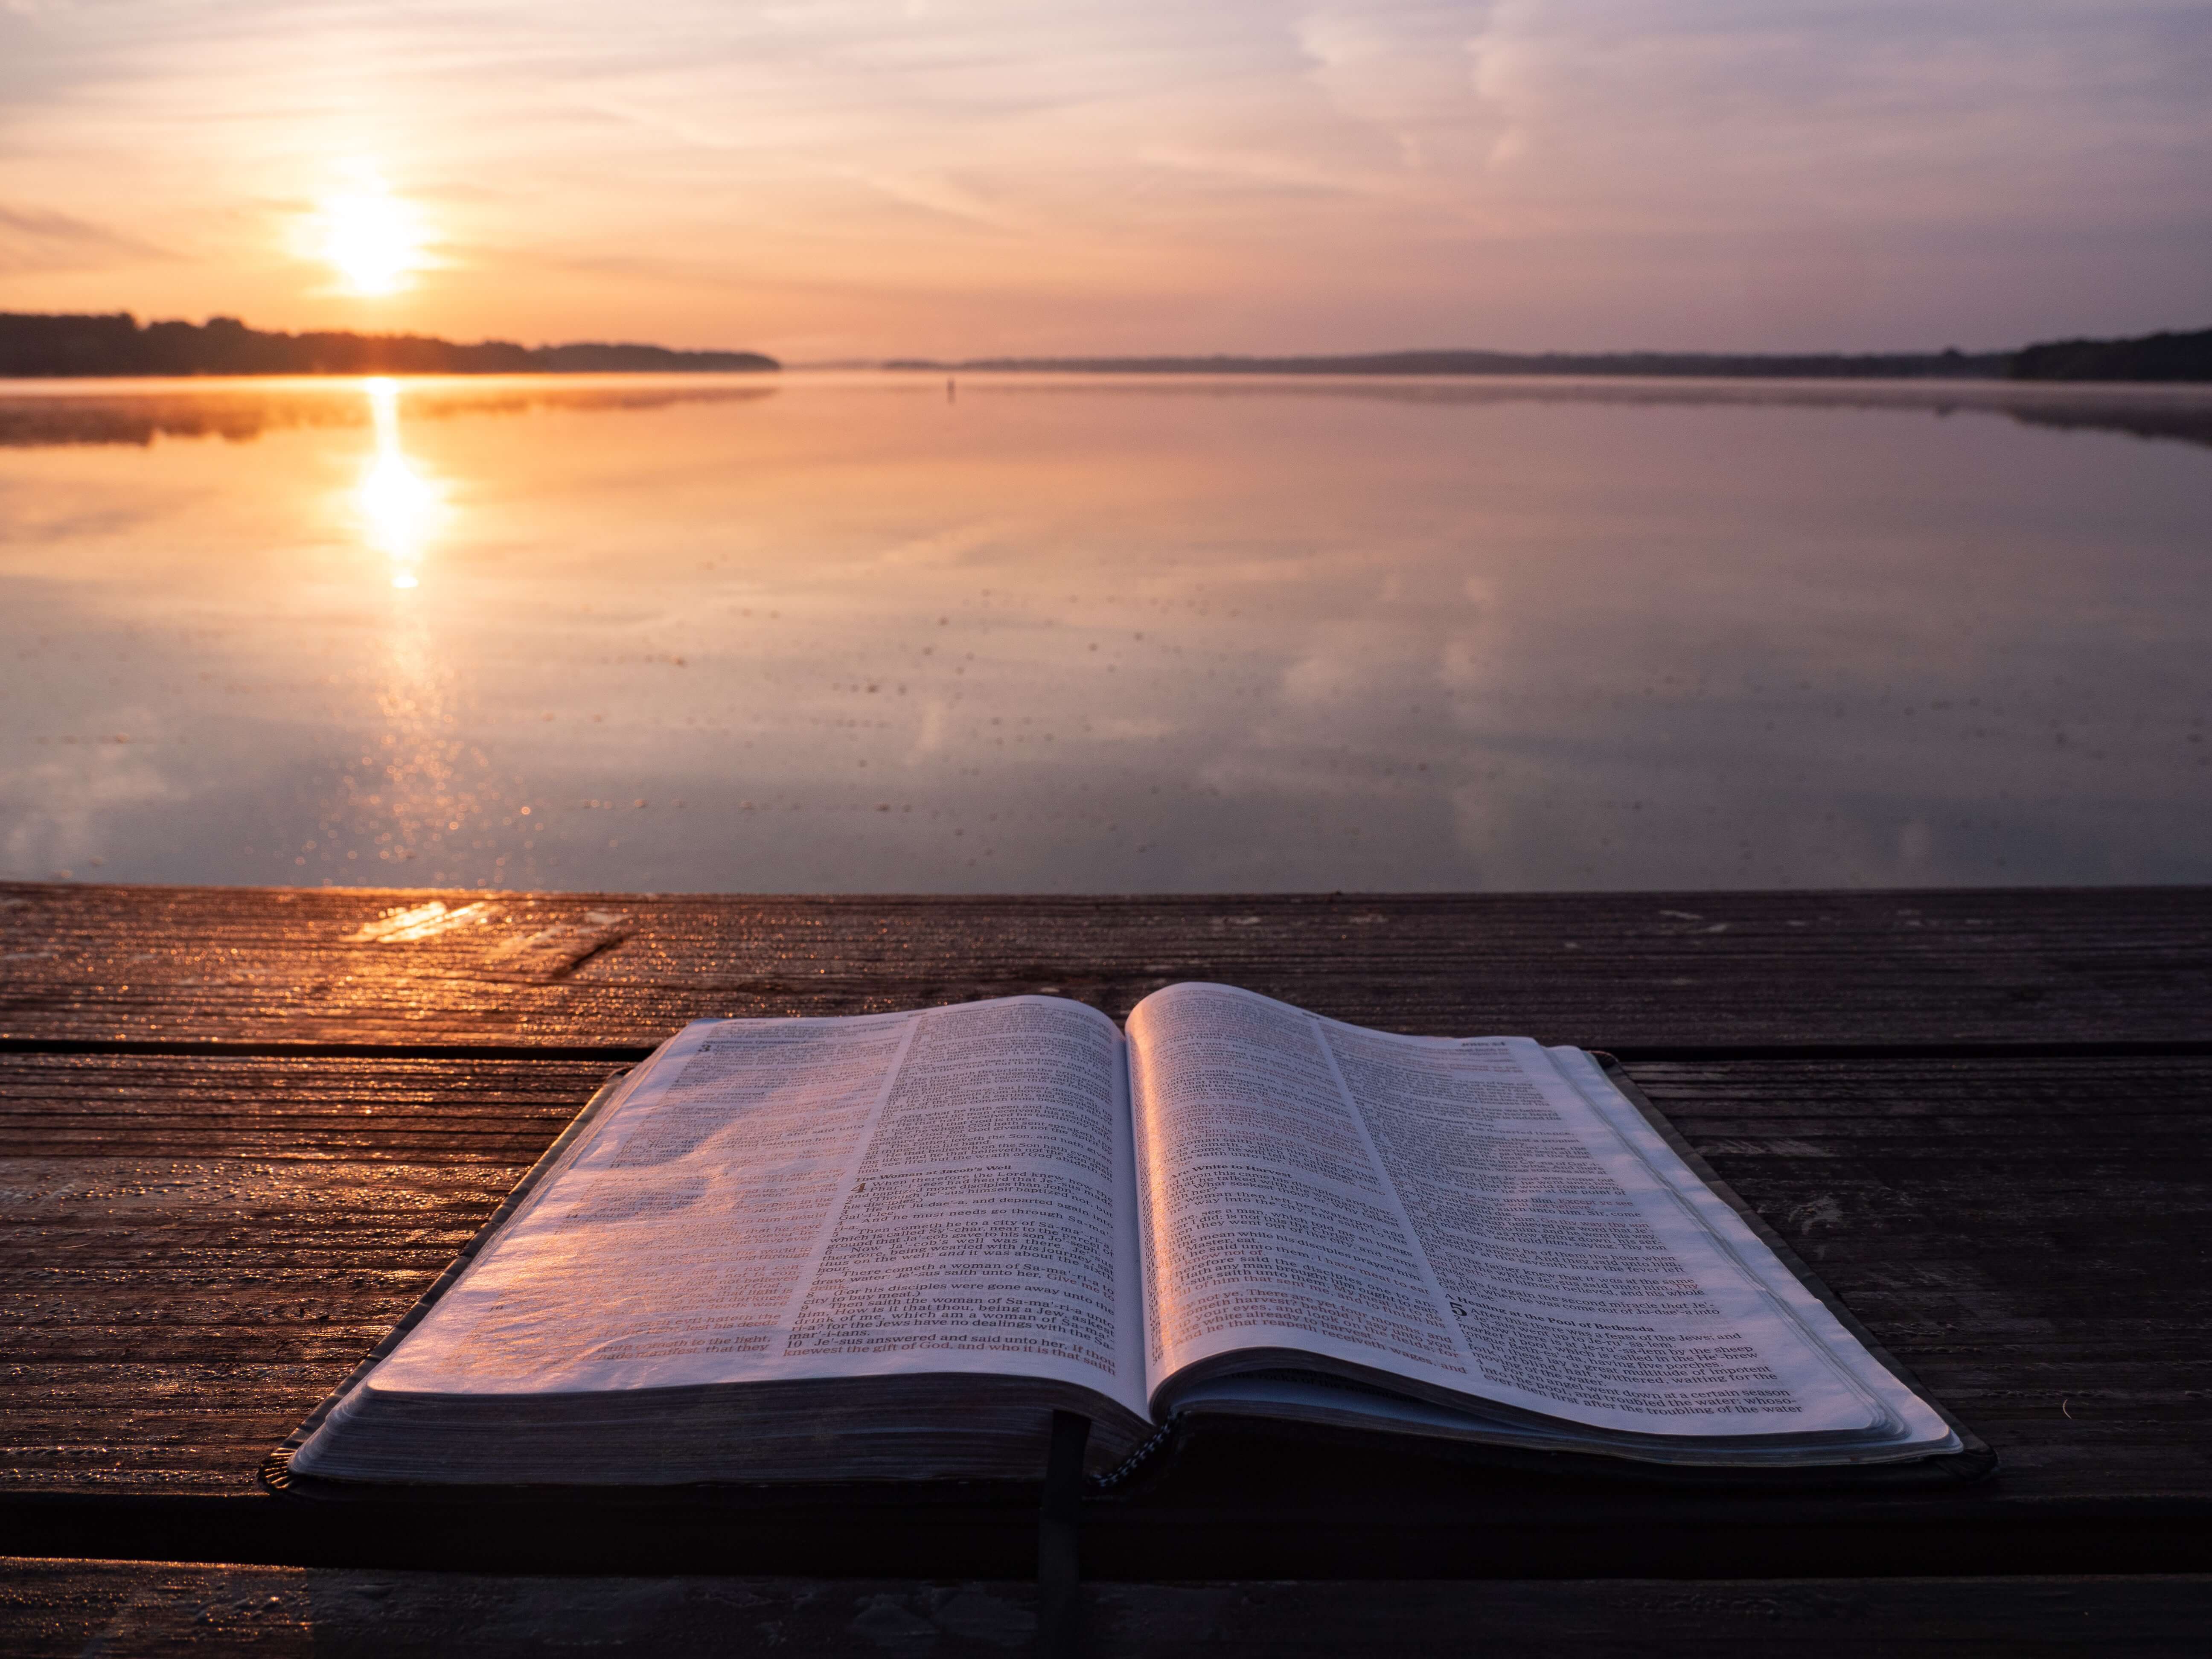 Bible in front of a lake